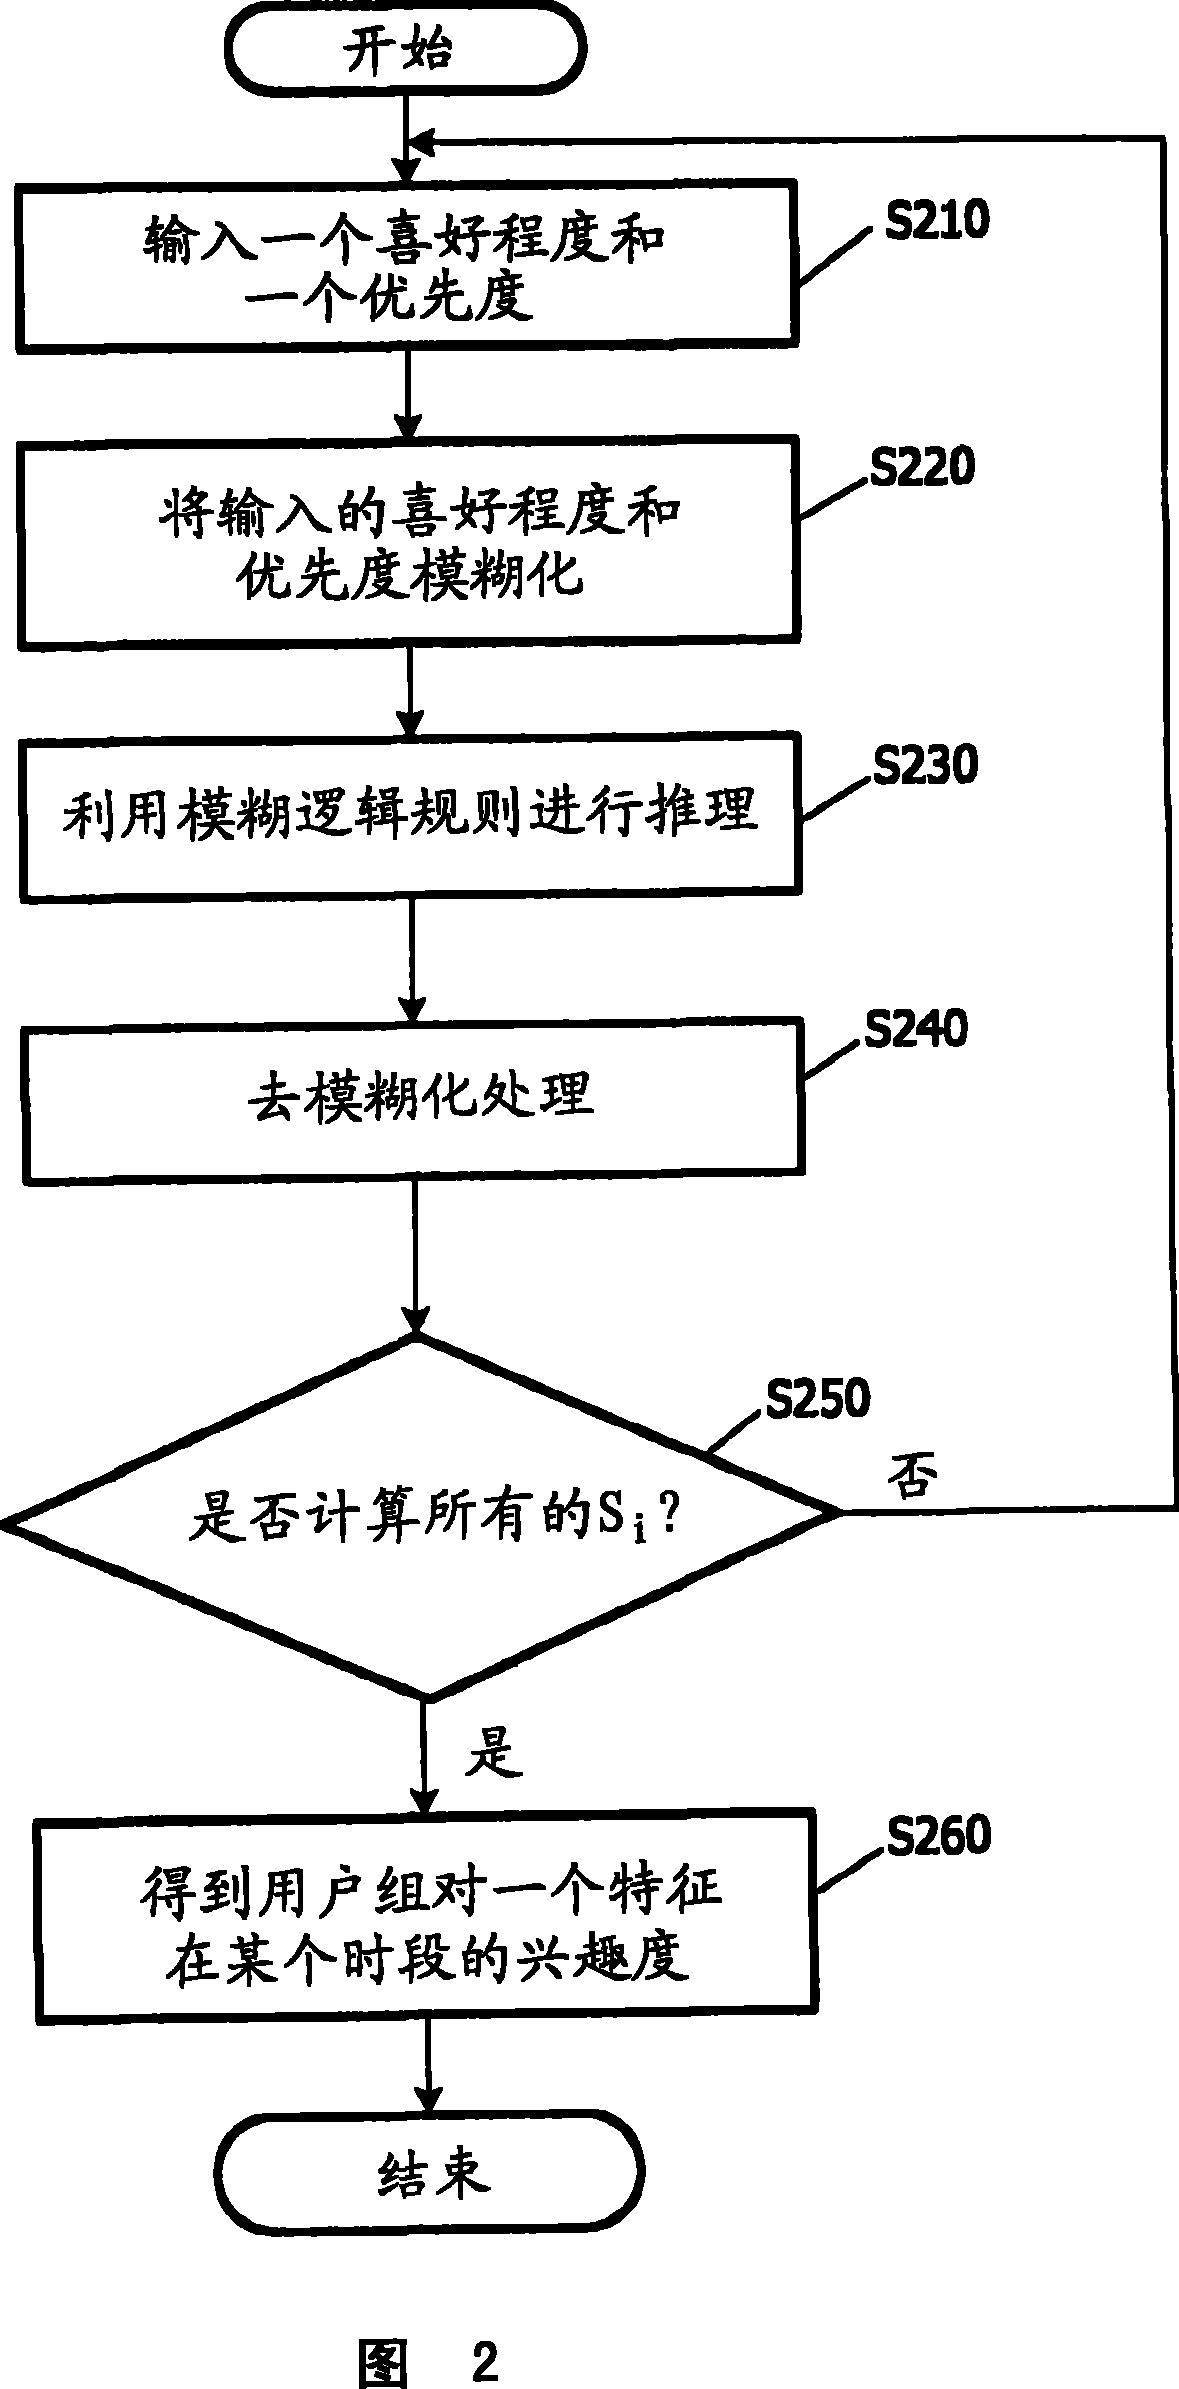 Method and apparatus for estimating total interest of a group of users directing to a content